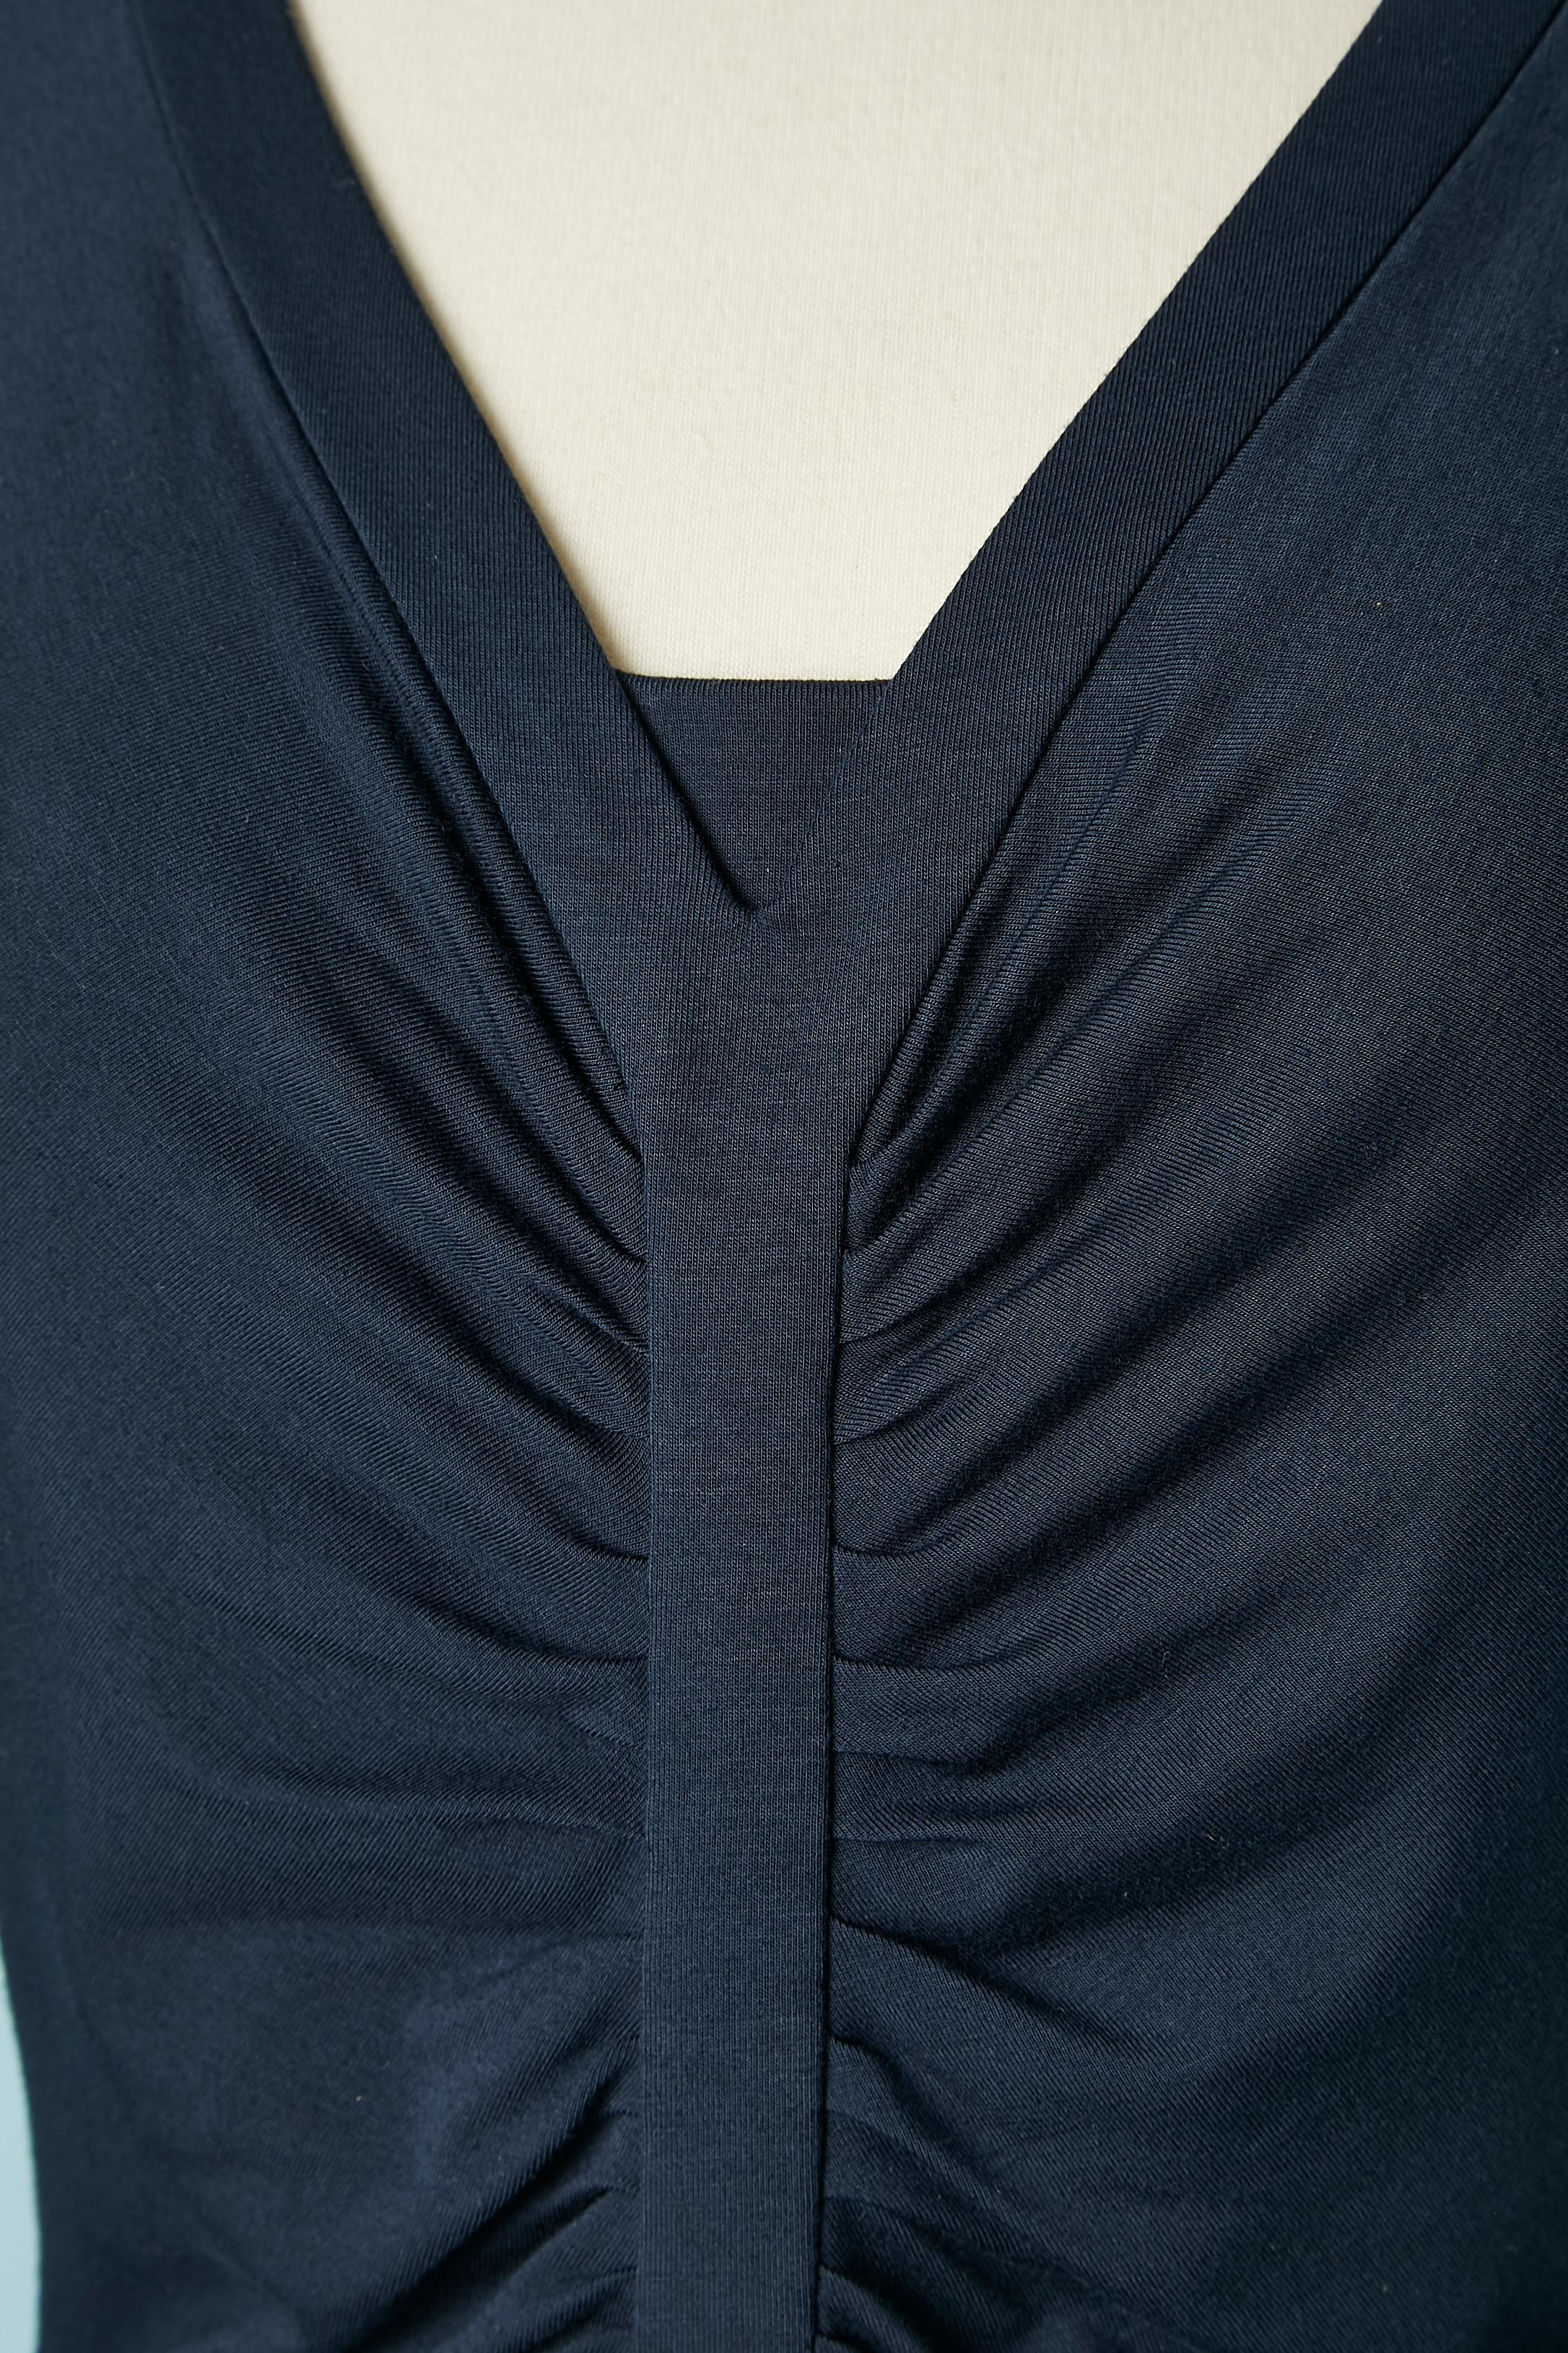 Navy blue cotton jersey dress draped in the front. Hologram authentification. 
SIZE S 